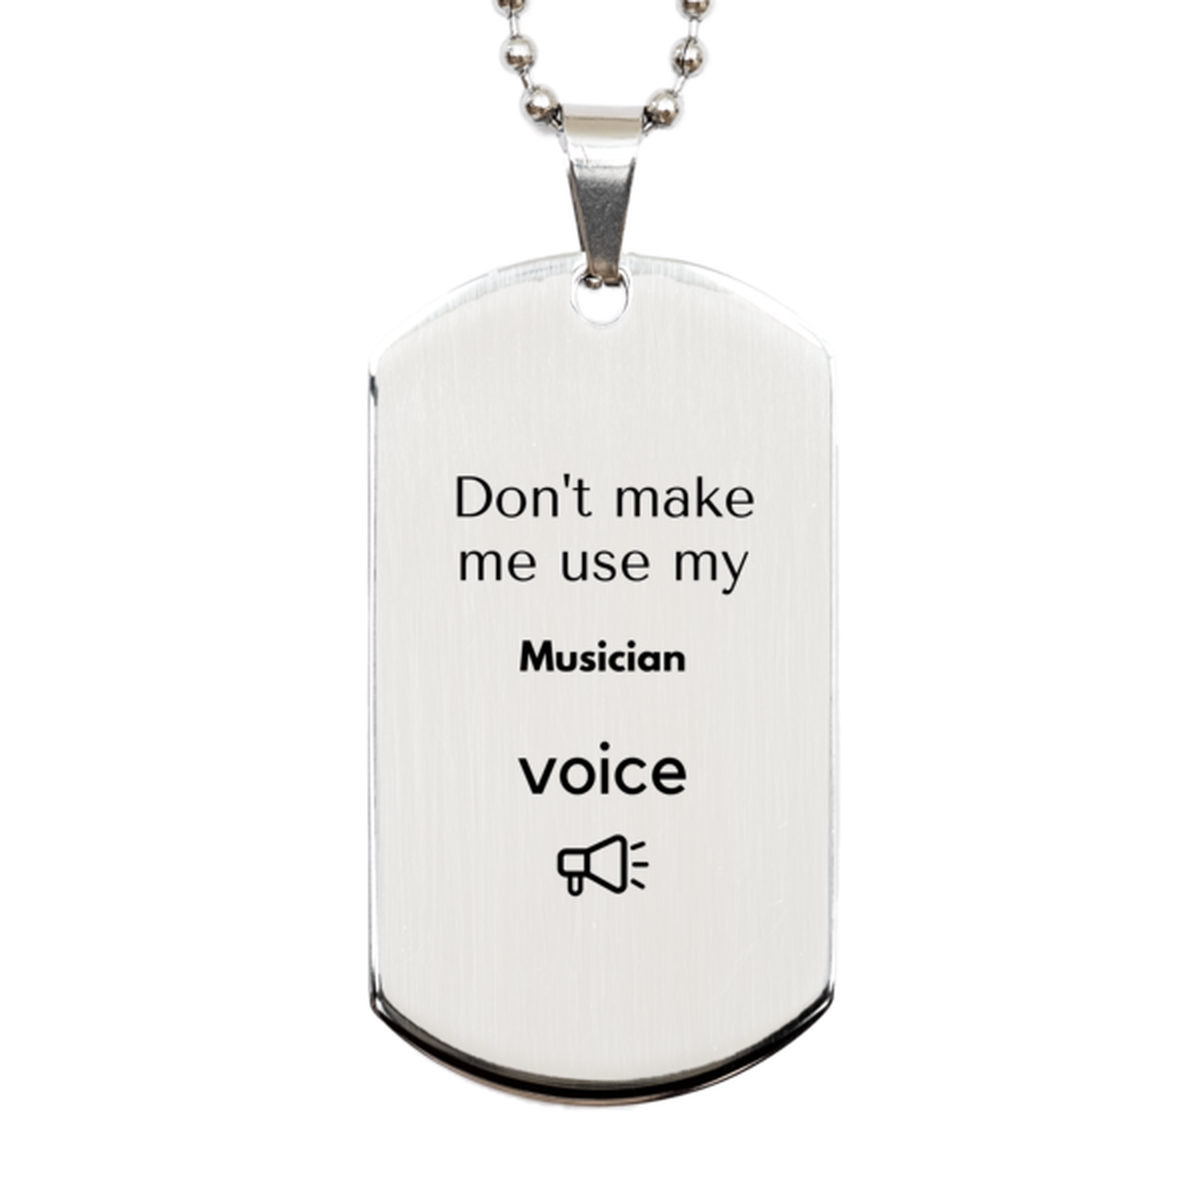 Don't make me use my Musician voice, Sarcasm Musician Gifts, Christmas Musician Silver Dog Tag Birthday Unique Gifts For Musician Coworkers, Men, Women, Colleague, Friends